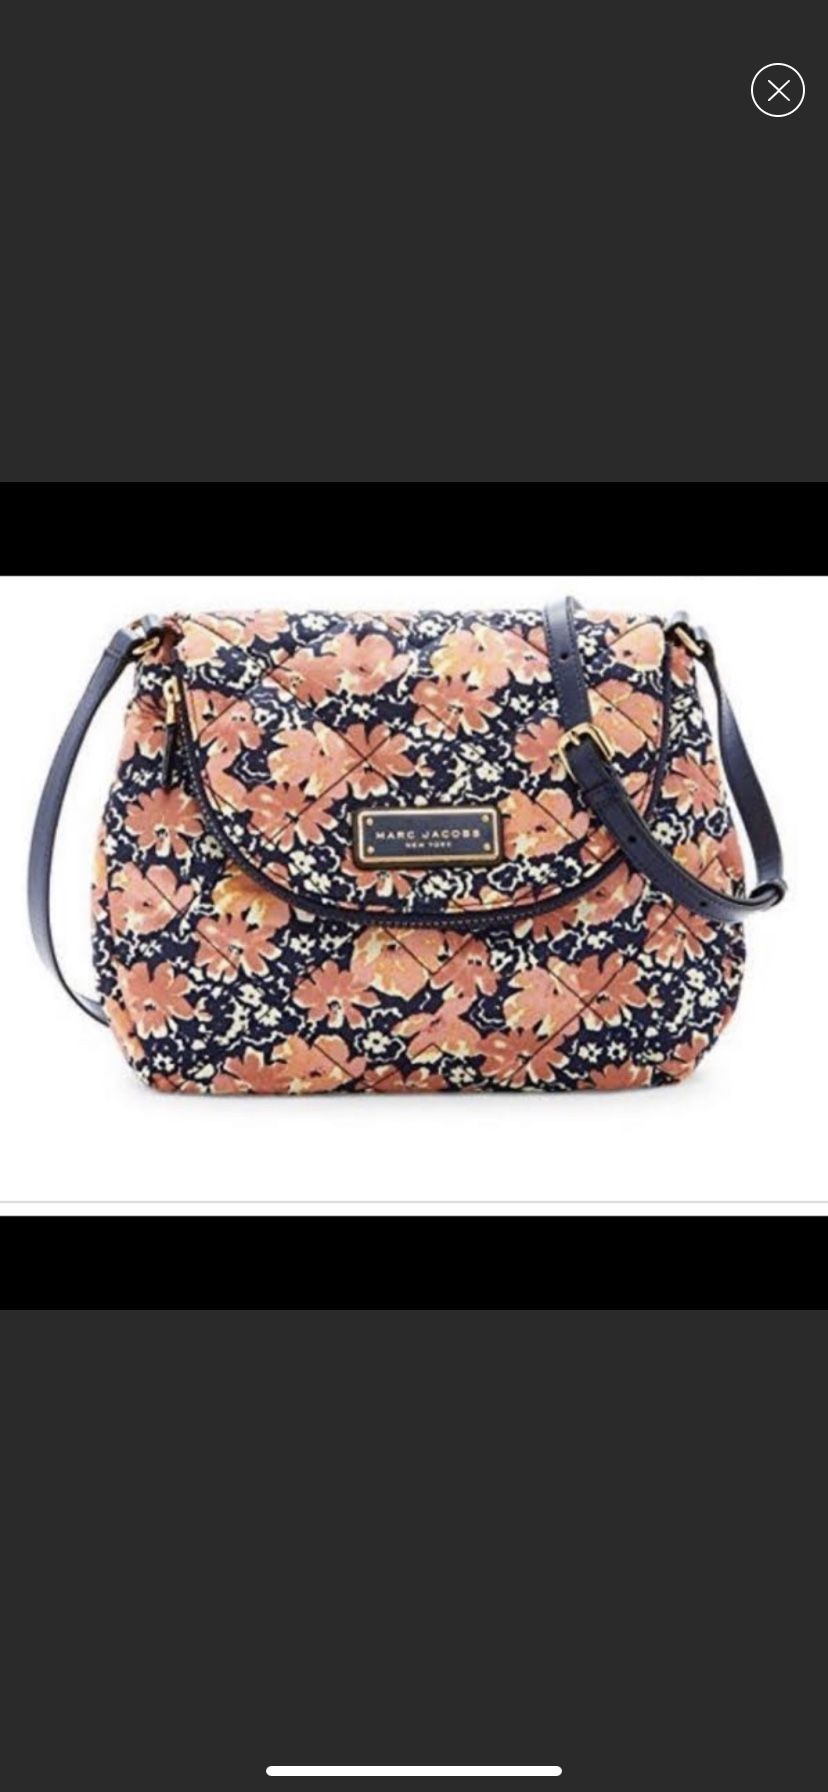 Authentic Marc Jacobs Floral Crossbody Bag